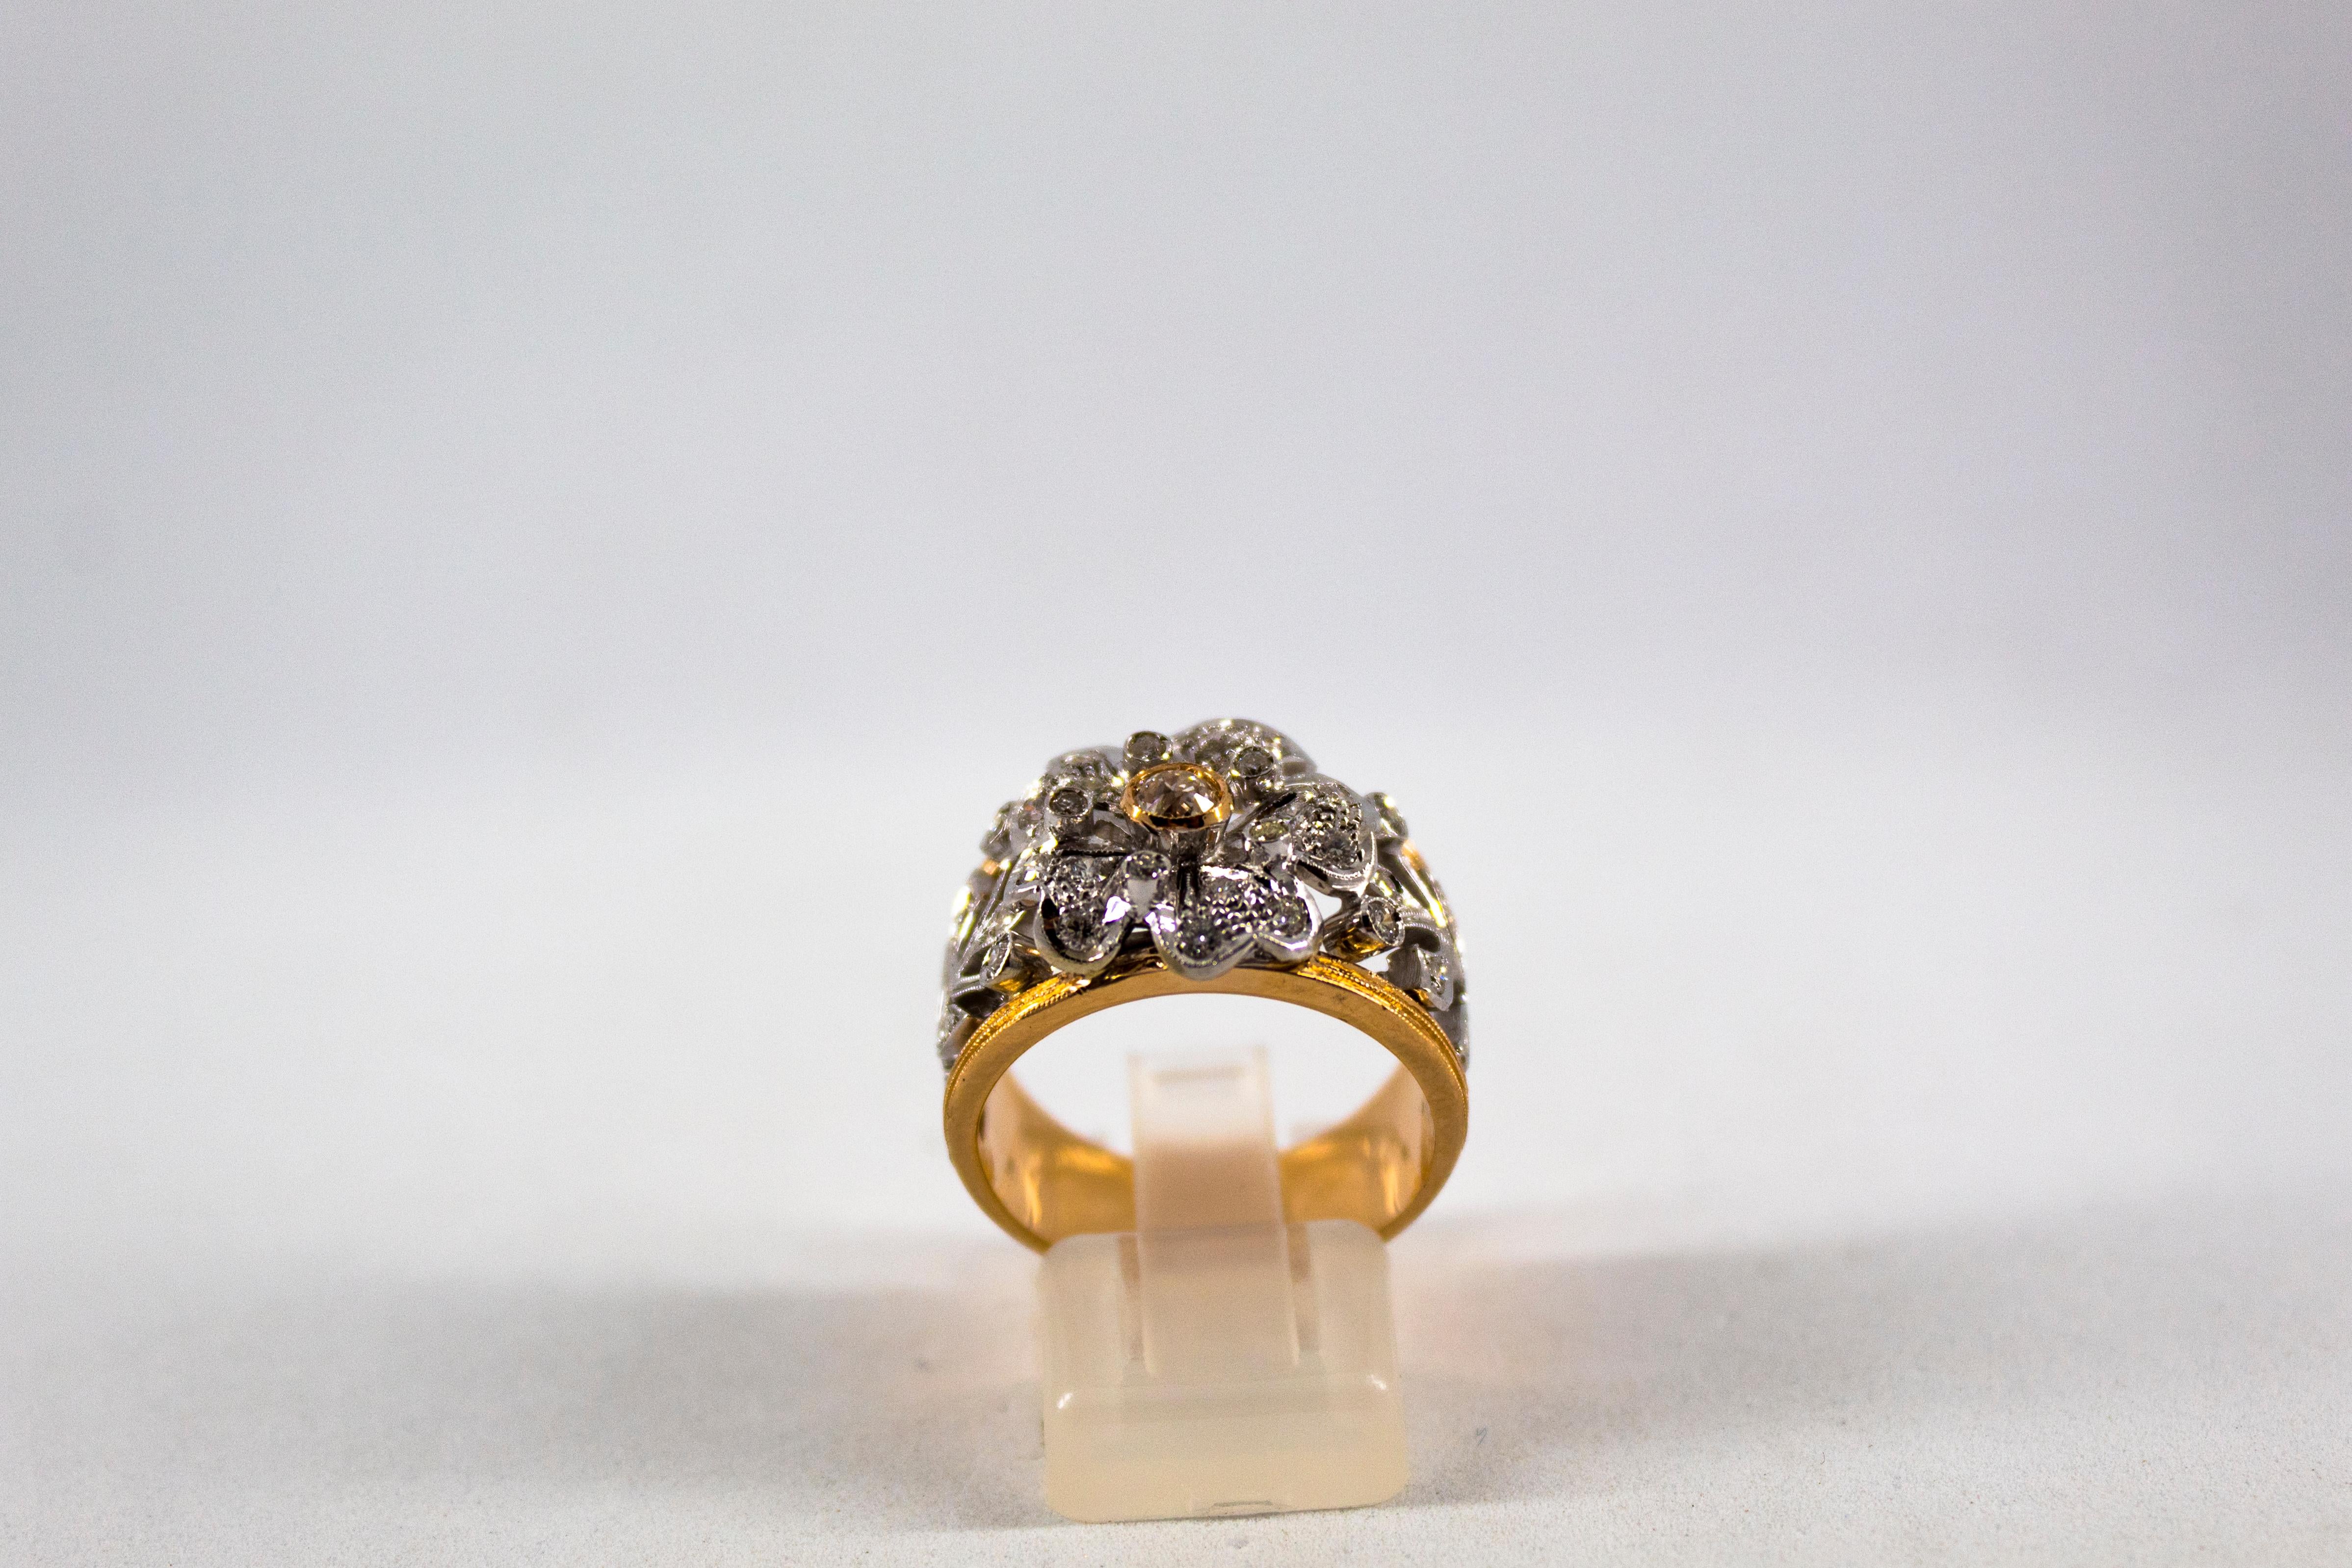 This Ring is made of 14K Yellow Gold.
This Ring has 0.70 Carats of White Modern Round Cut Diamonds.

This Ring is available also with different central stone: it's available with Emerald, Ruby or Blue Sapphire.

Size ITA: 17 USA: 8

We're a workshop